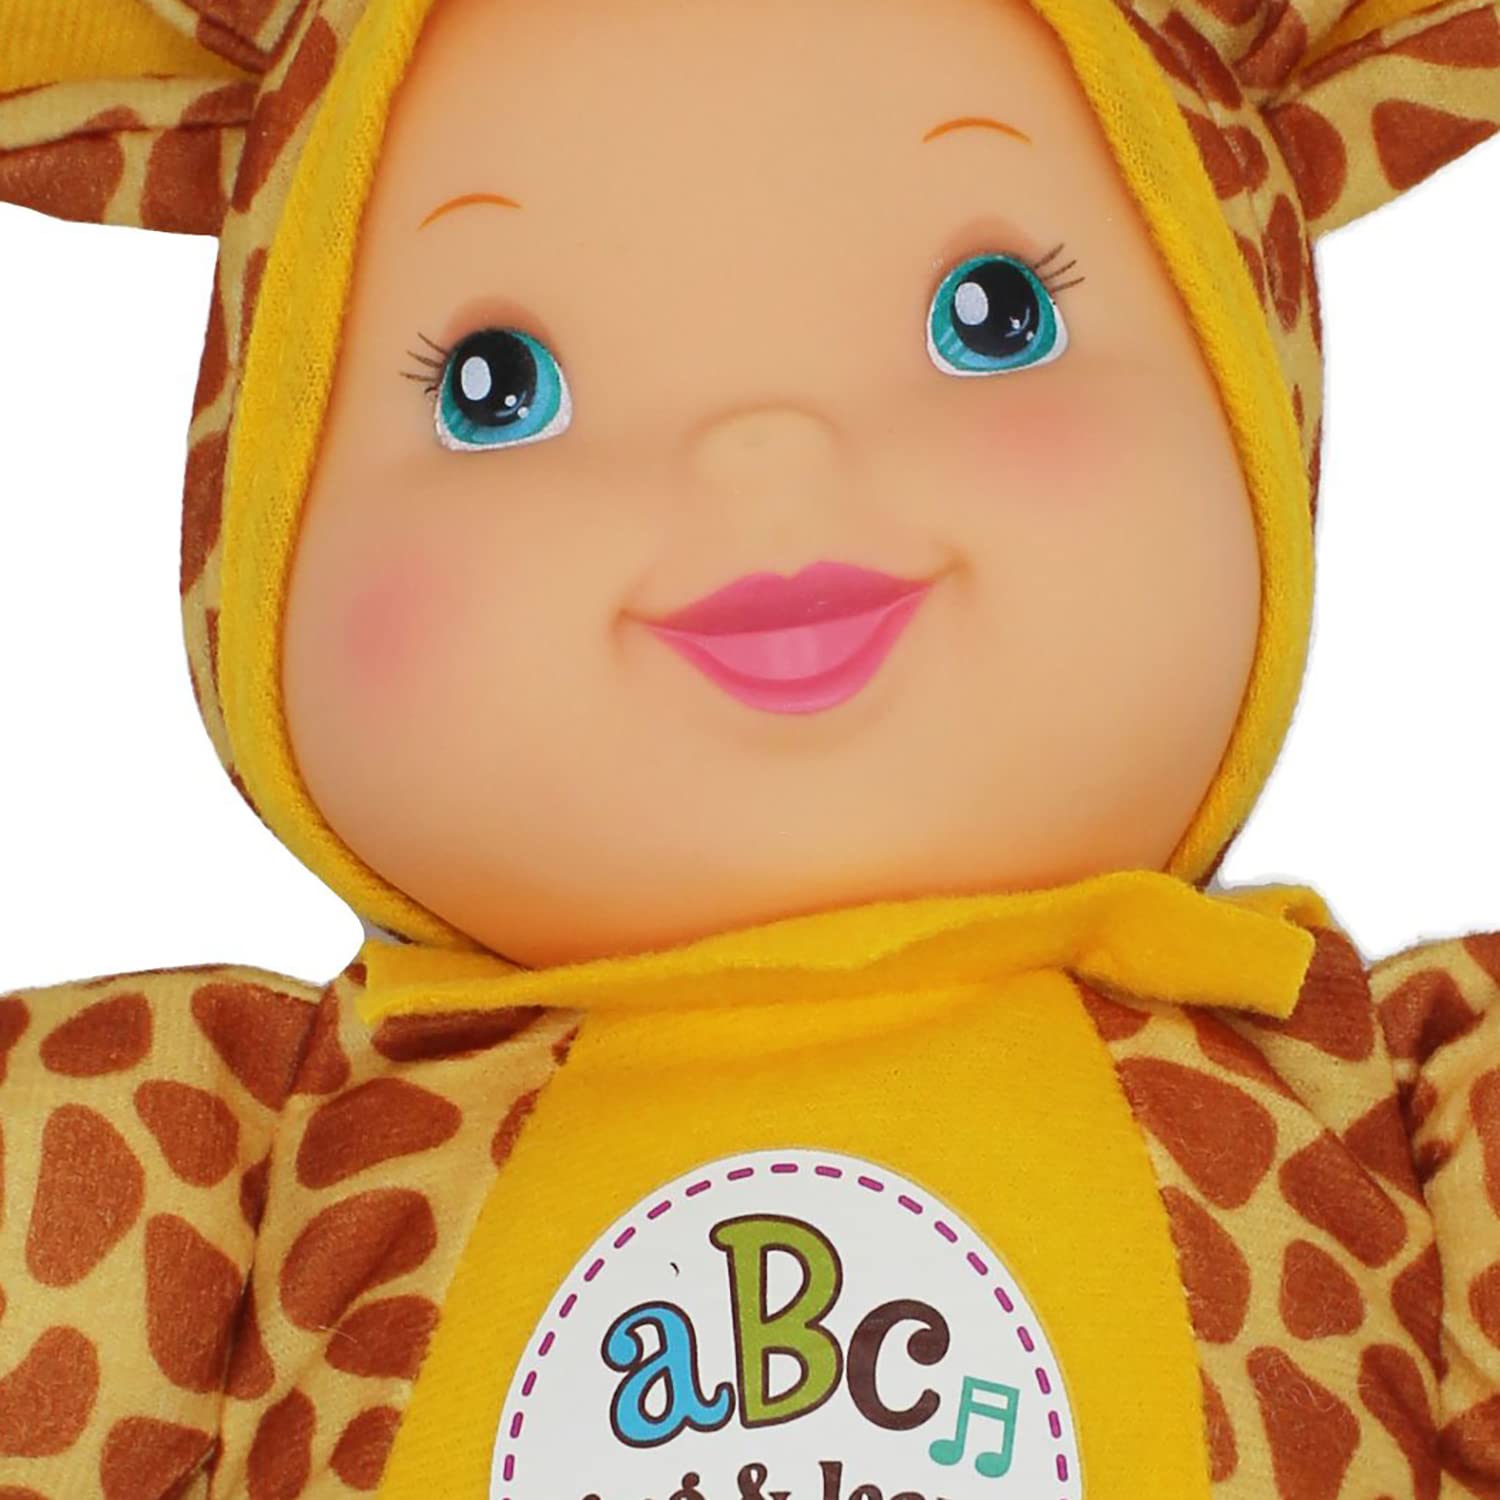 Baby's First First Sing & Learn 11' Doll, Elephant, Sings ABCs & 123s, Machine Washable, Lifelike Features, for Ages 0+